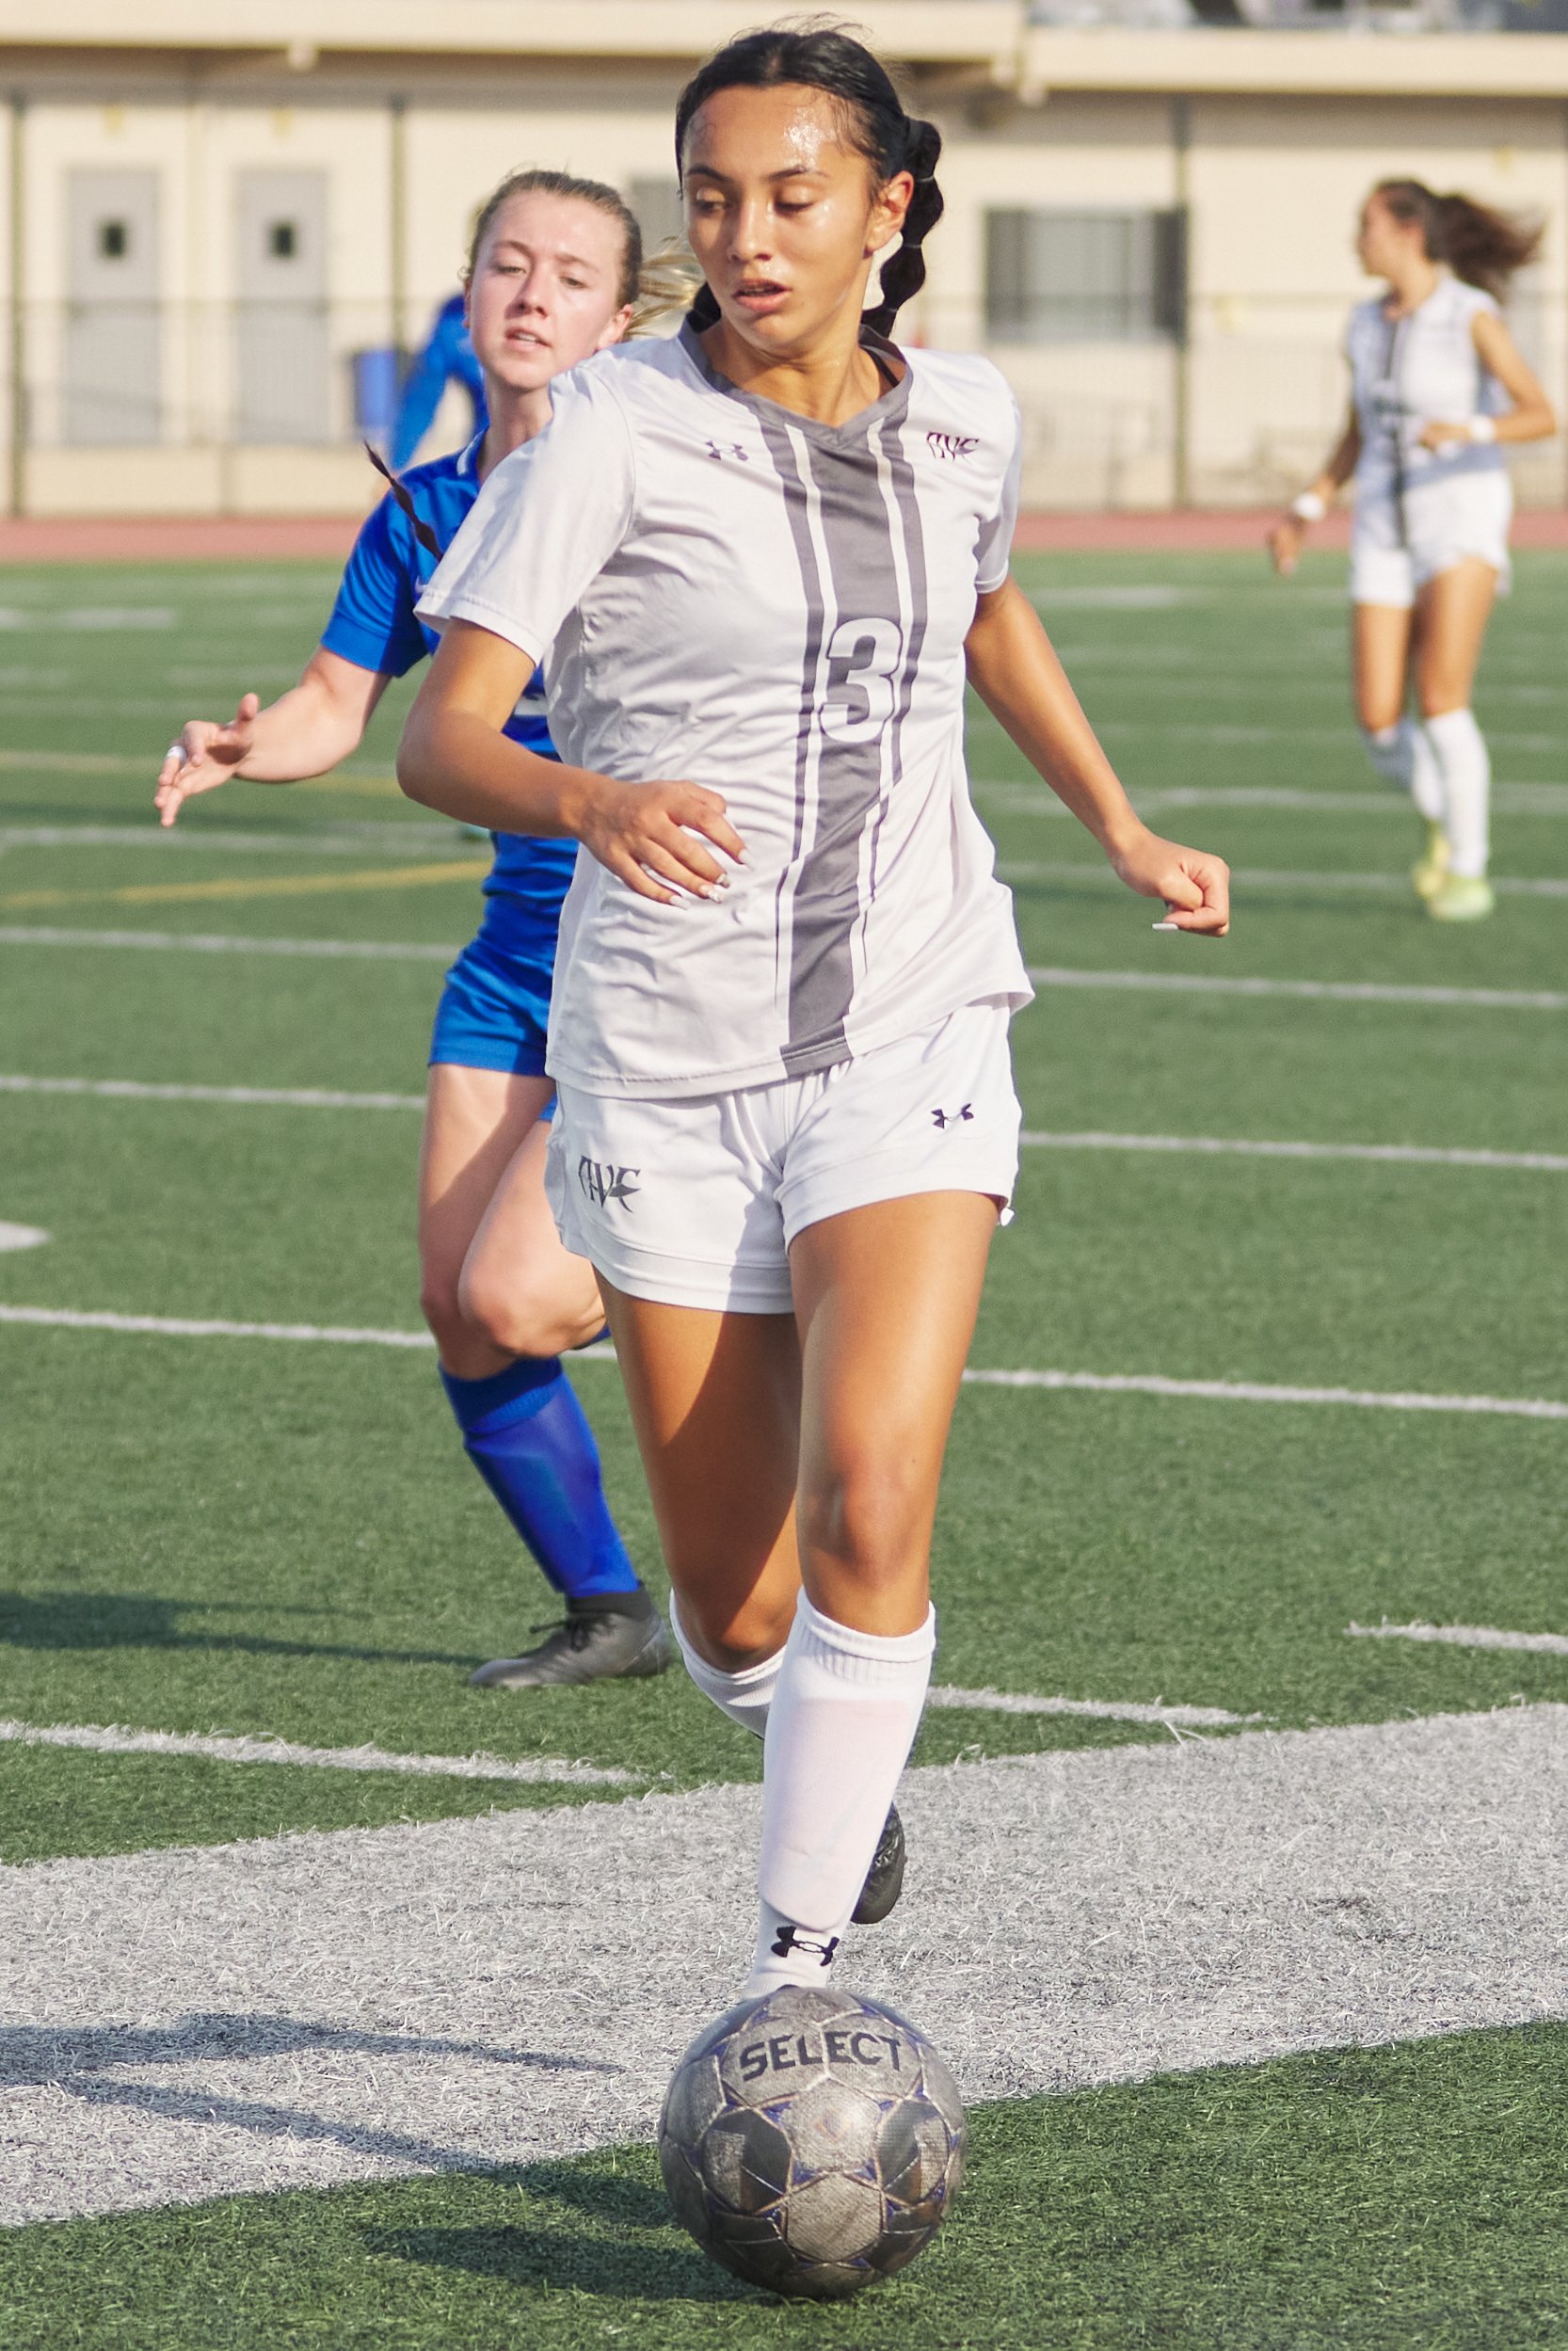  Antelope Valley College Marauders' Brenda Murillo keeps in front of Santa Monica College Corsairs' Eden Hotch during the women's soccer match on Tuesday, Oct. 11, 2022, at Corsair Field in Santa Monica, Calif. The Corsairs lost 6-0. (Nicholas McCall